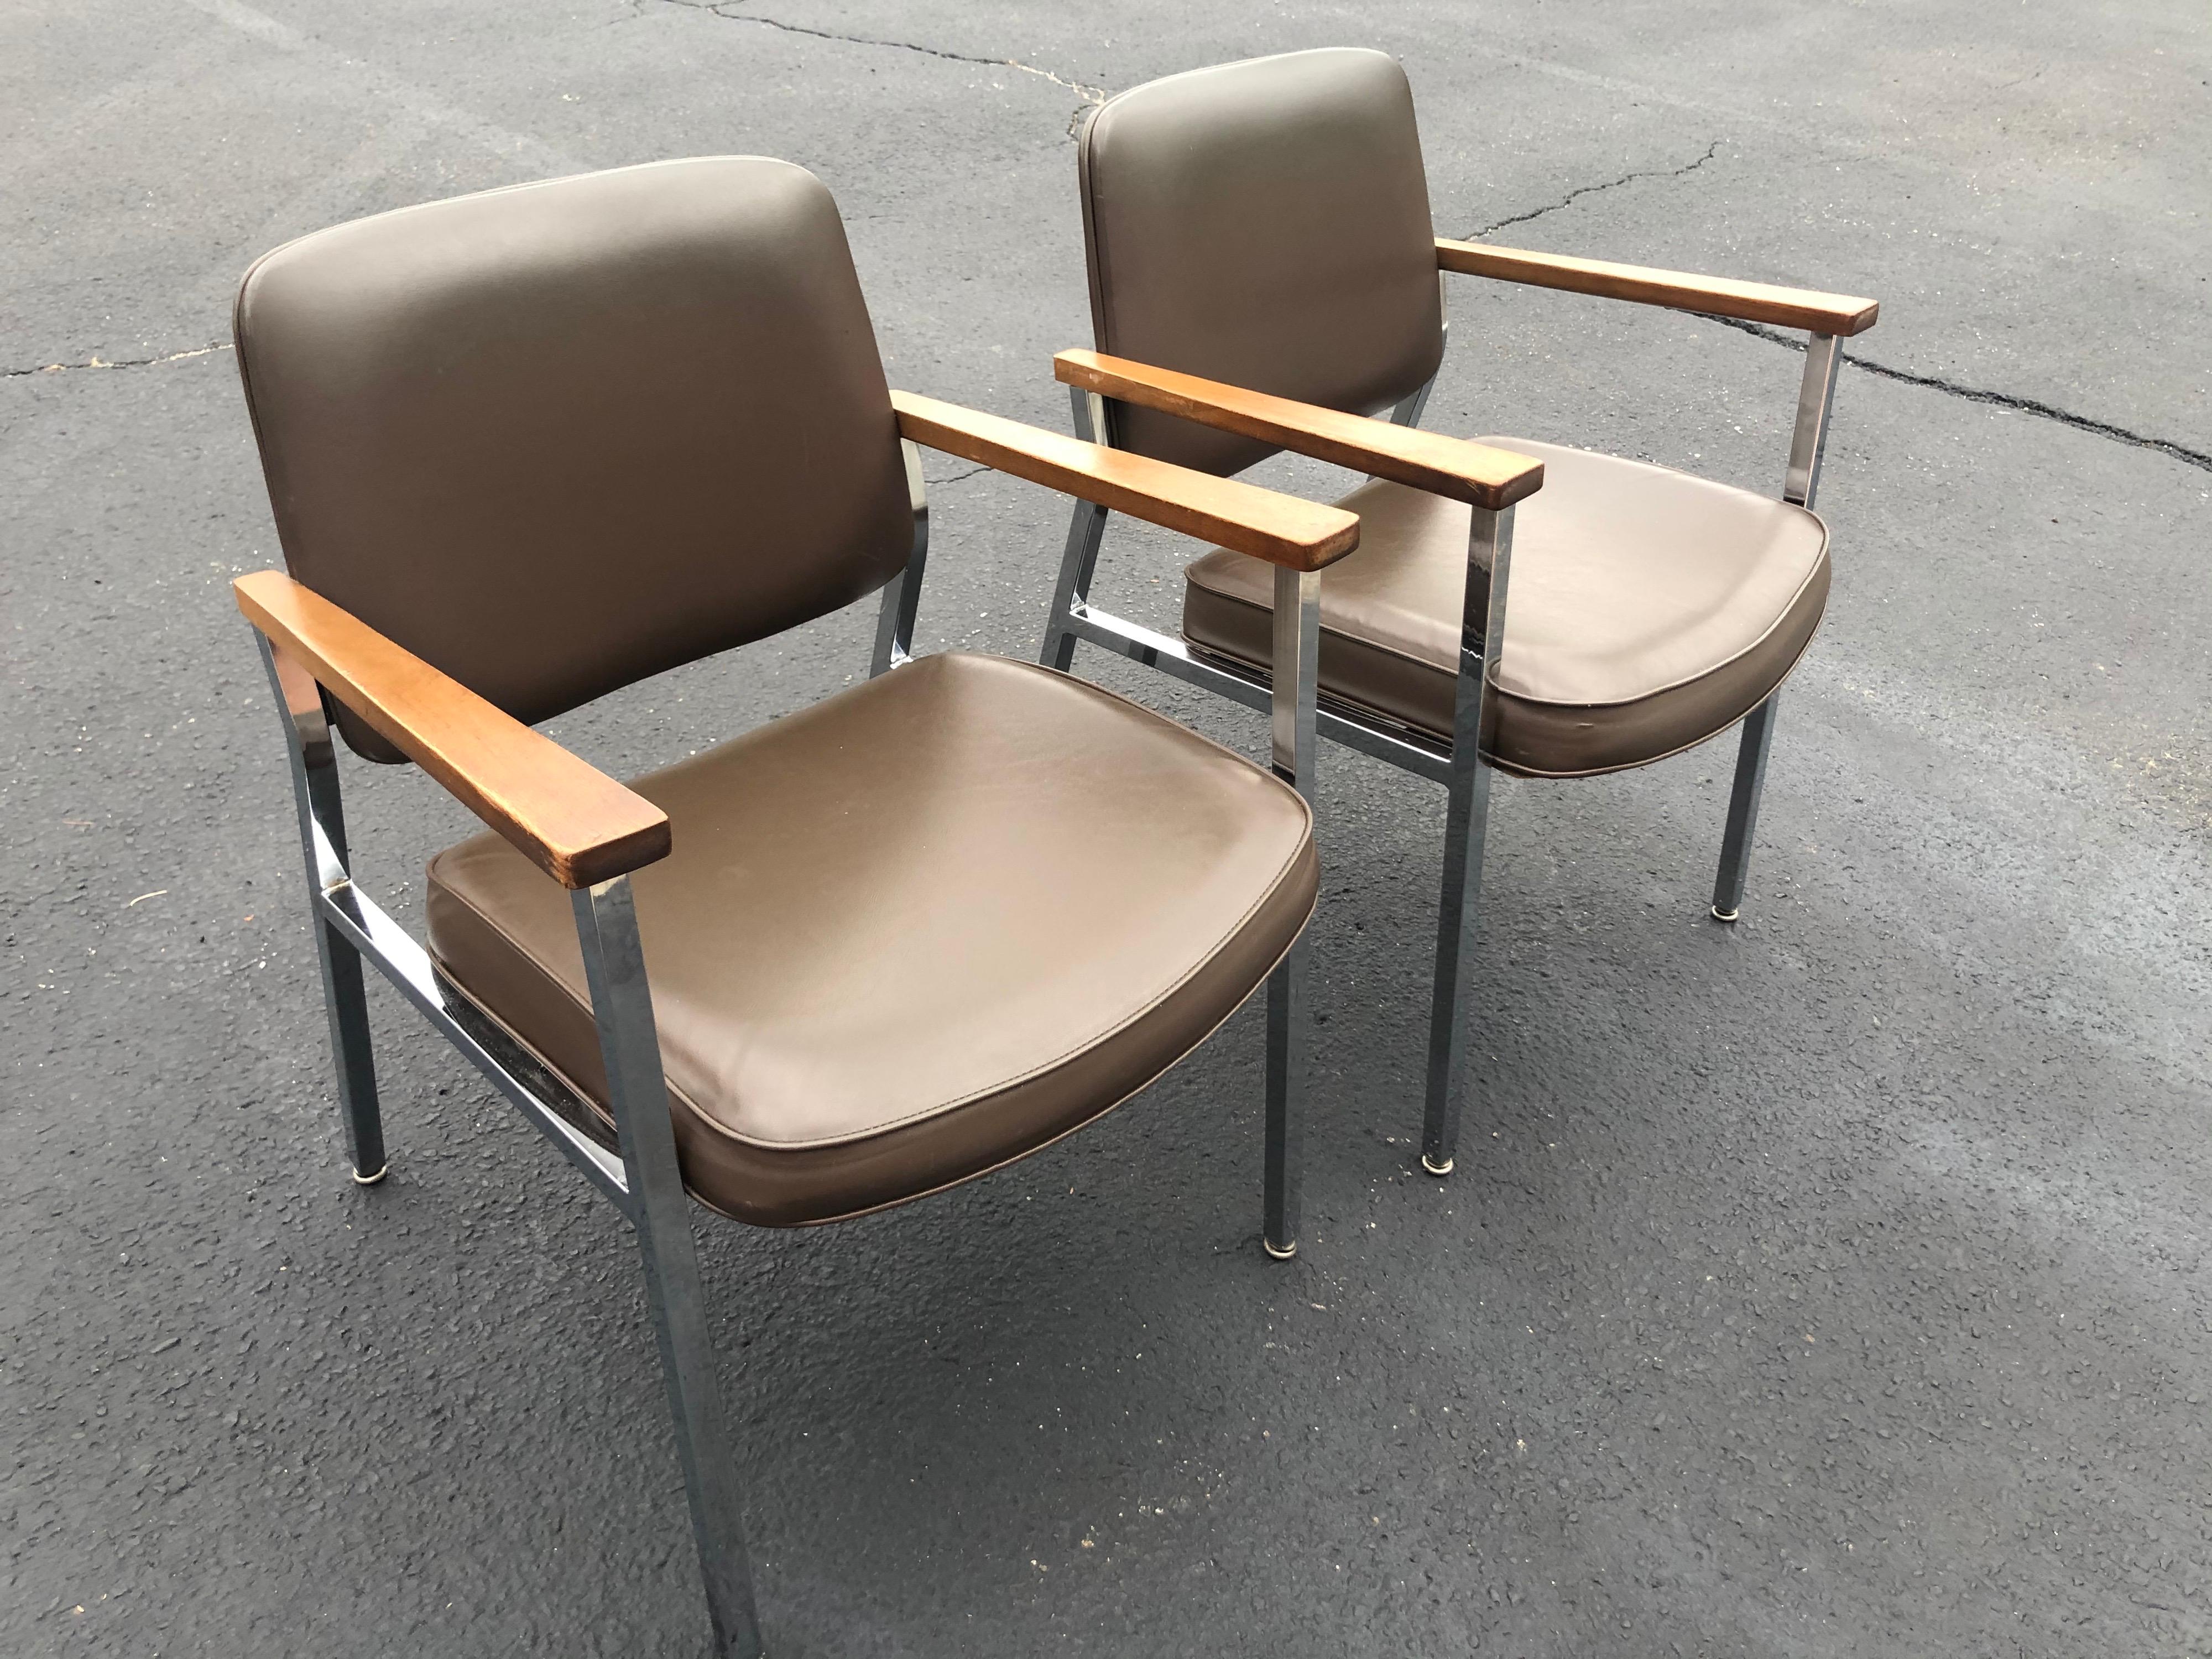 Pair of mid century chrome office chairs in sage brown vinyl. With Classic solid walnut arm rests. These would make a great addition to any home office. Made by United chair company out of Alabama. For you animal lovers this is vegan leather-vinyl.